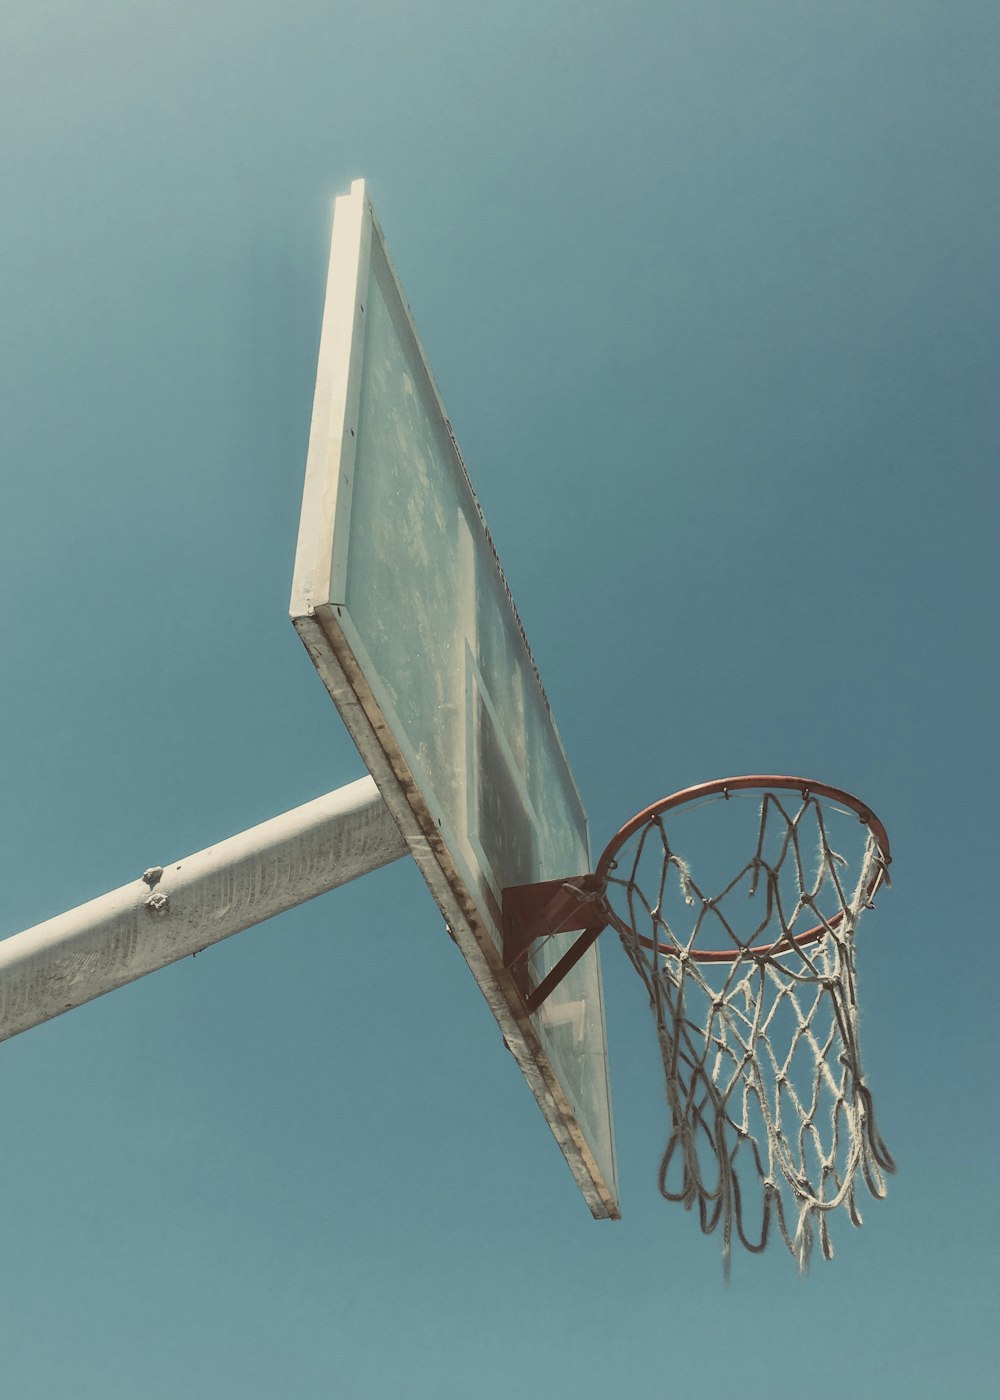 white and red basketball hoop under blue sky during daytime